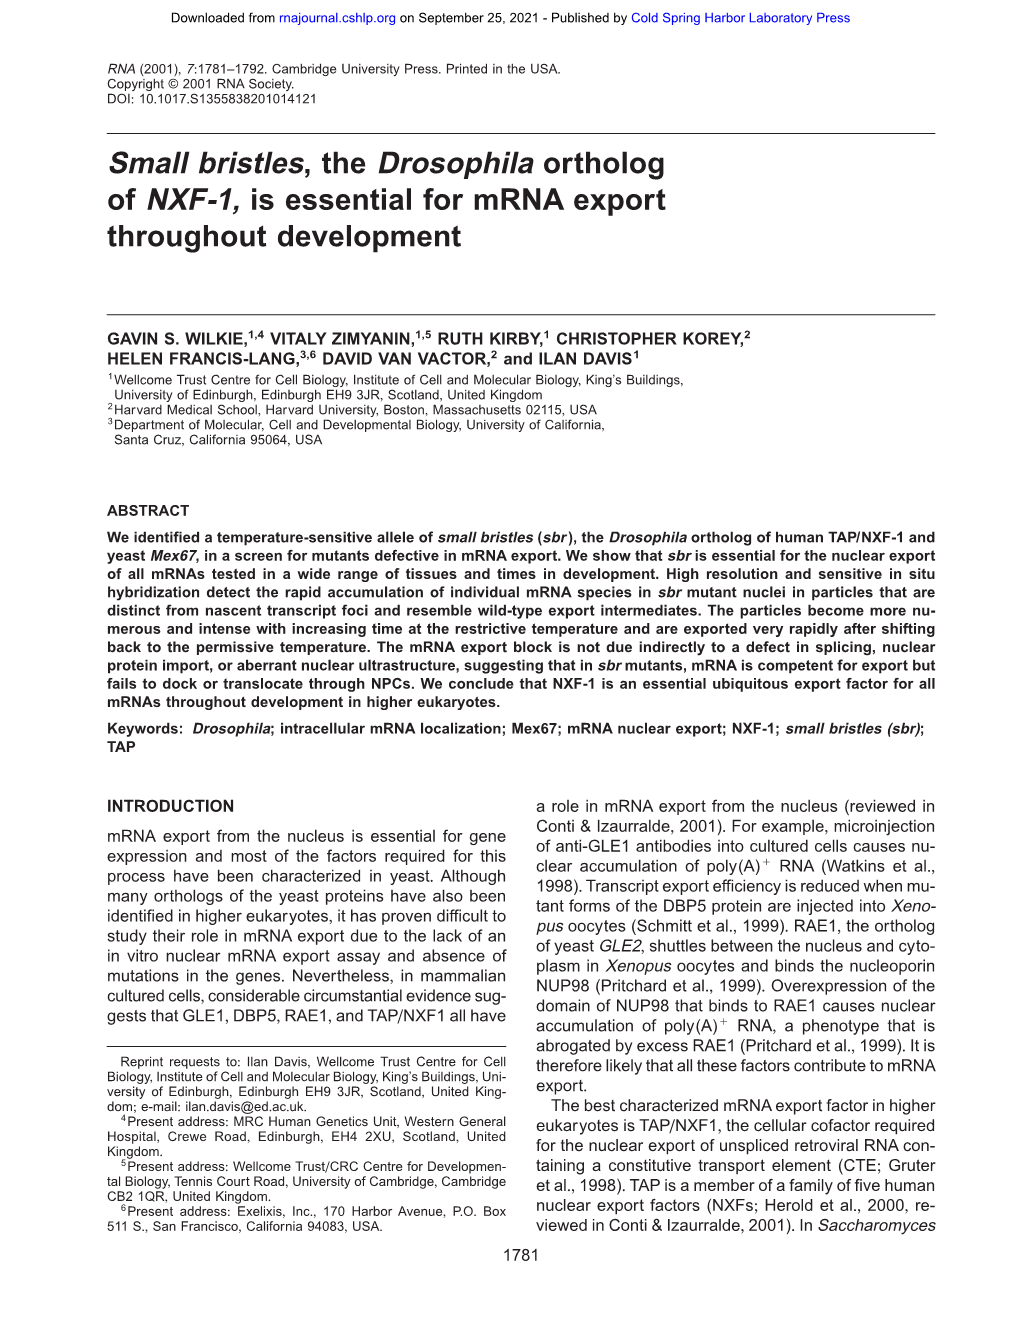 Small Bristles, the Drosophila Ortholog of NXF-1, Is Essential for Mrna Export Throughout Development